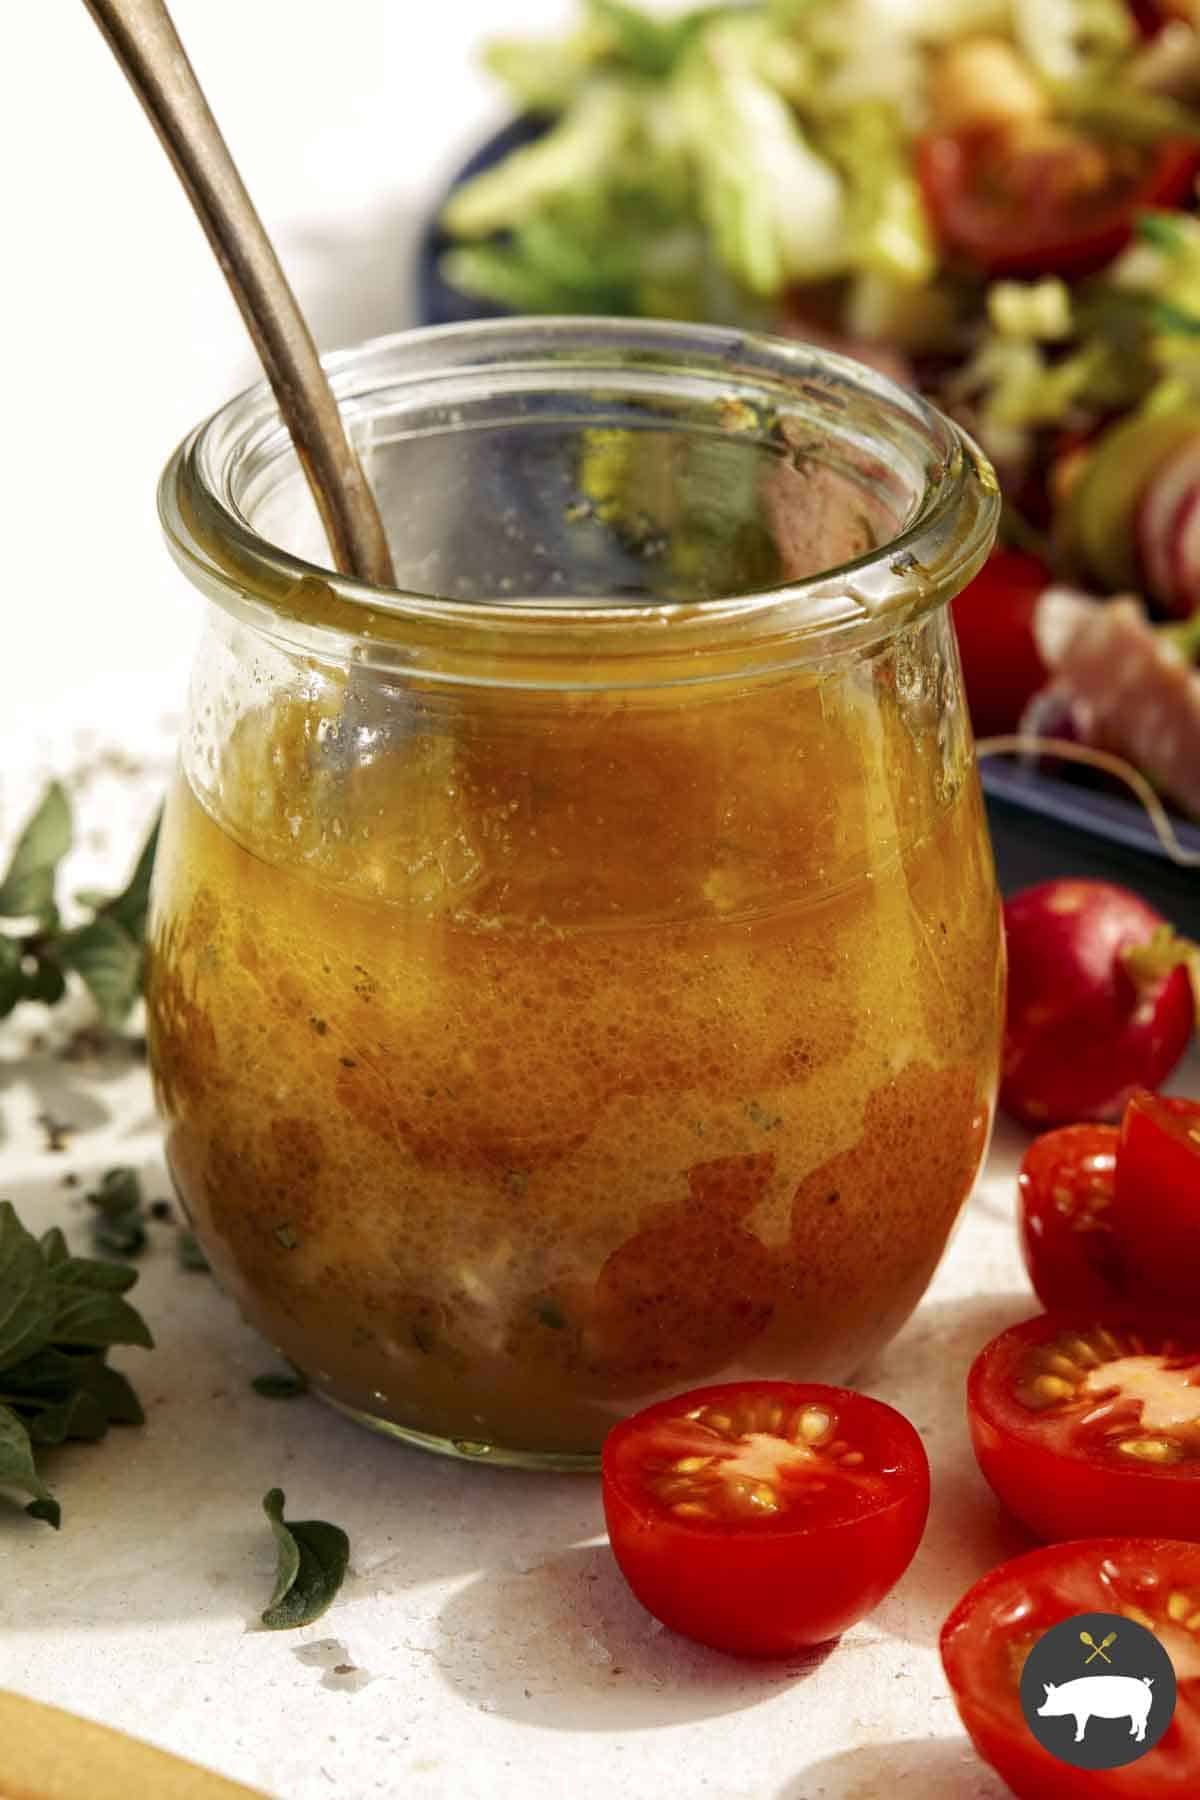 Red wine vinaigrette in a jar with a salad on the side.